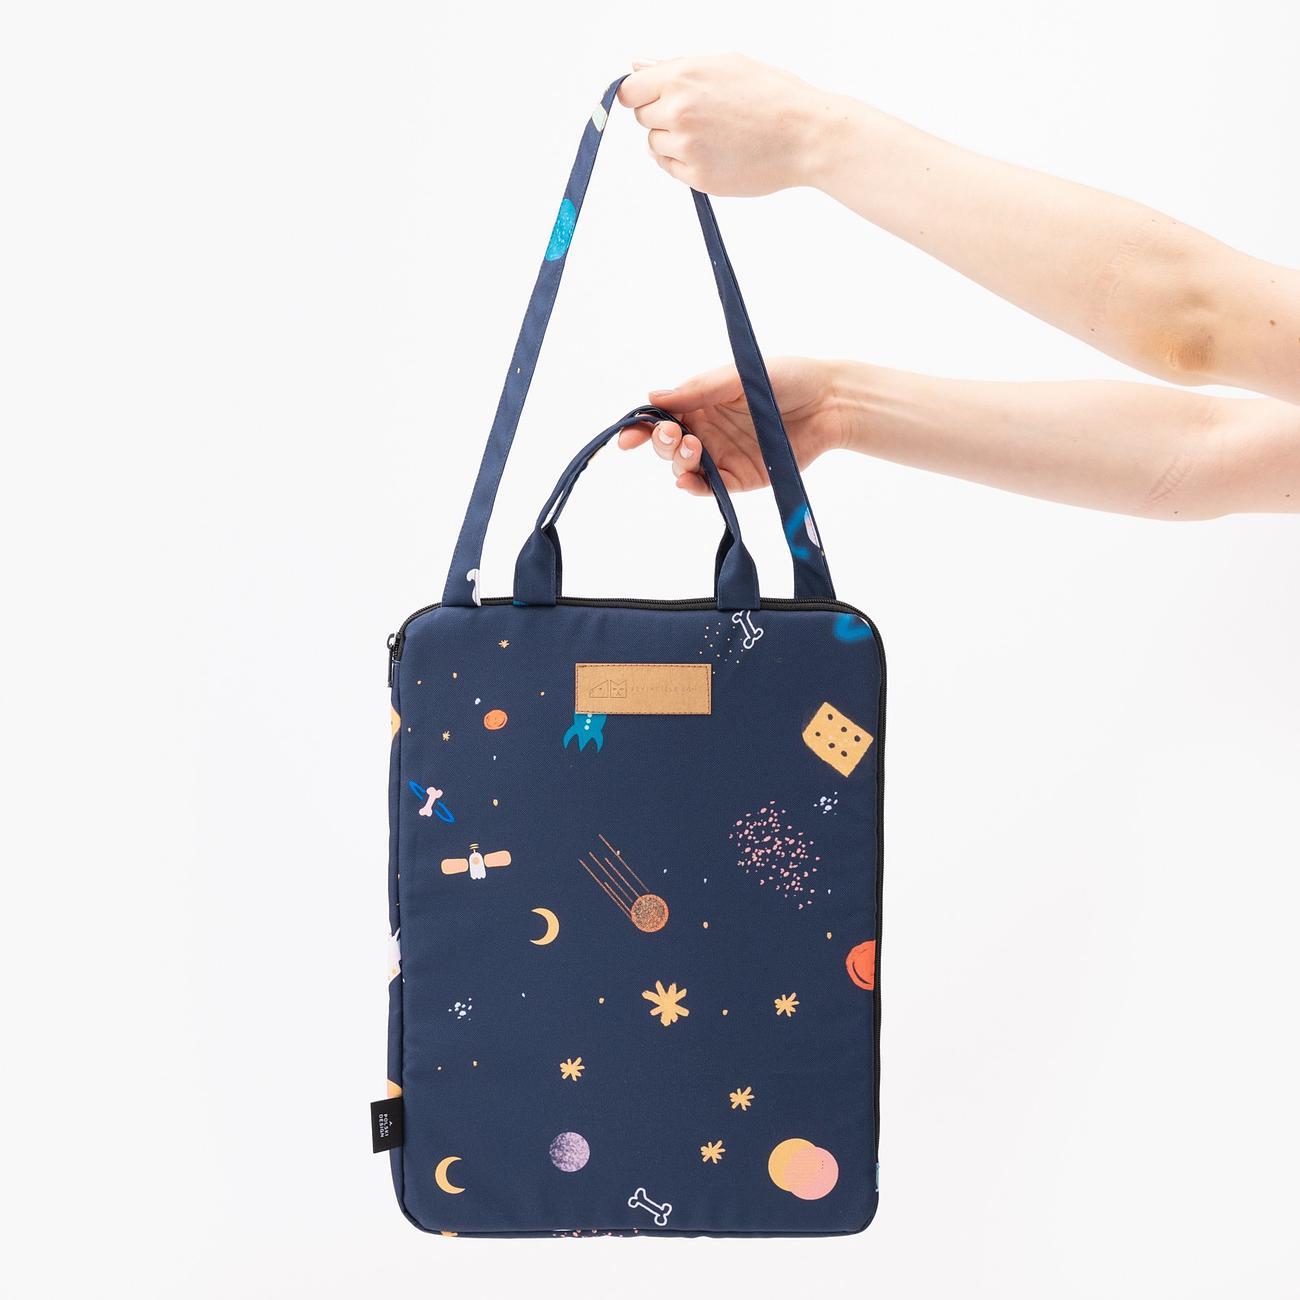 Laptop case "I need space"